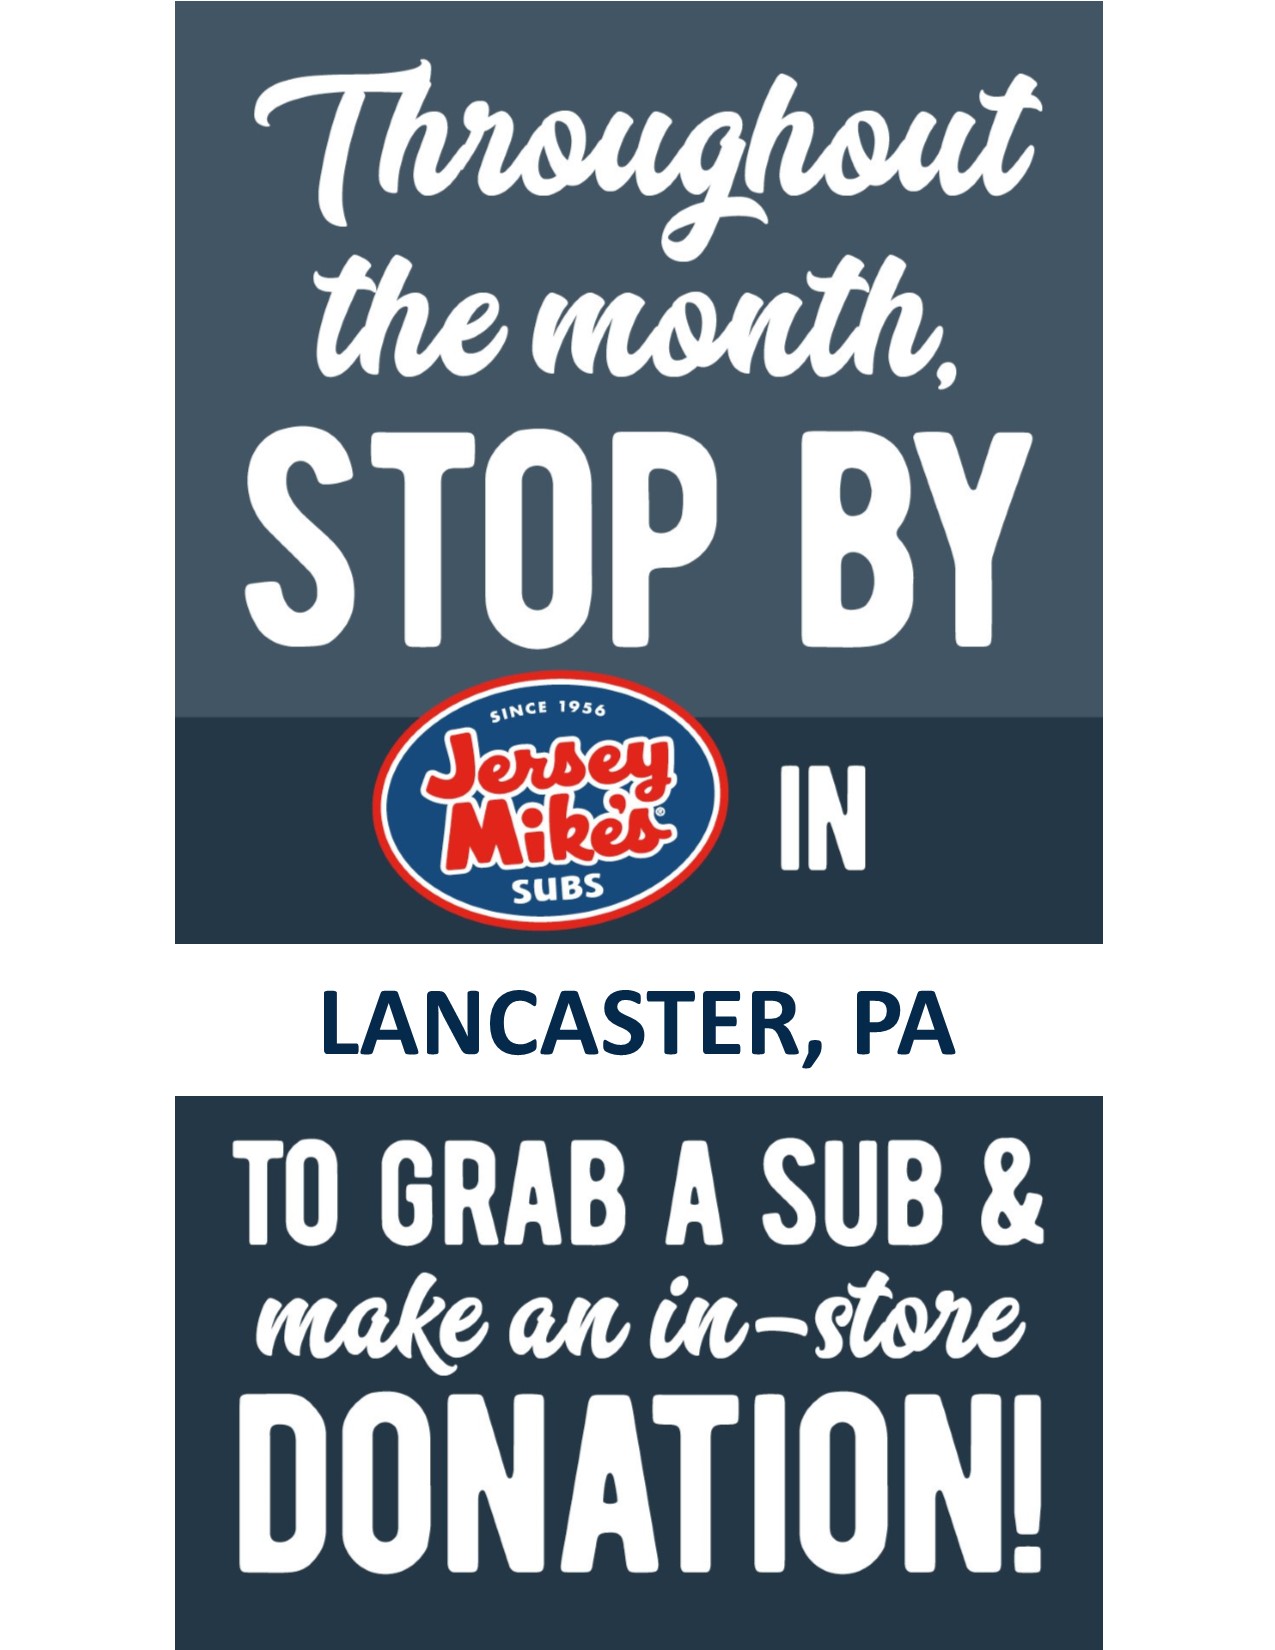 Jersey-Mikes-Flyer